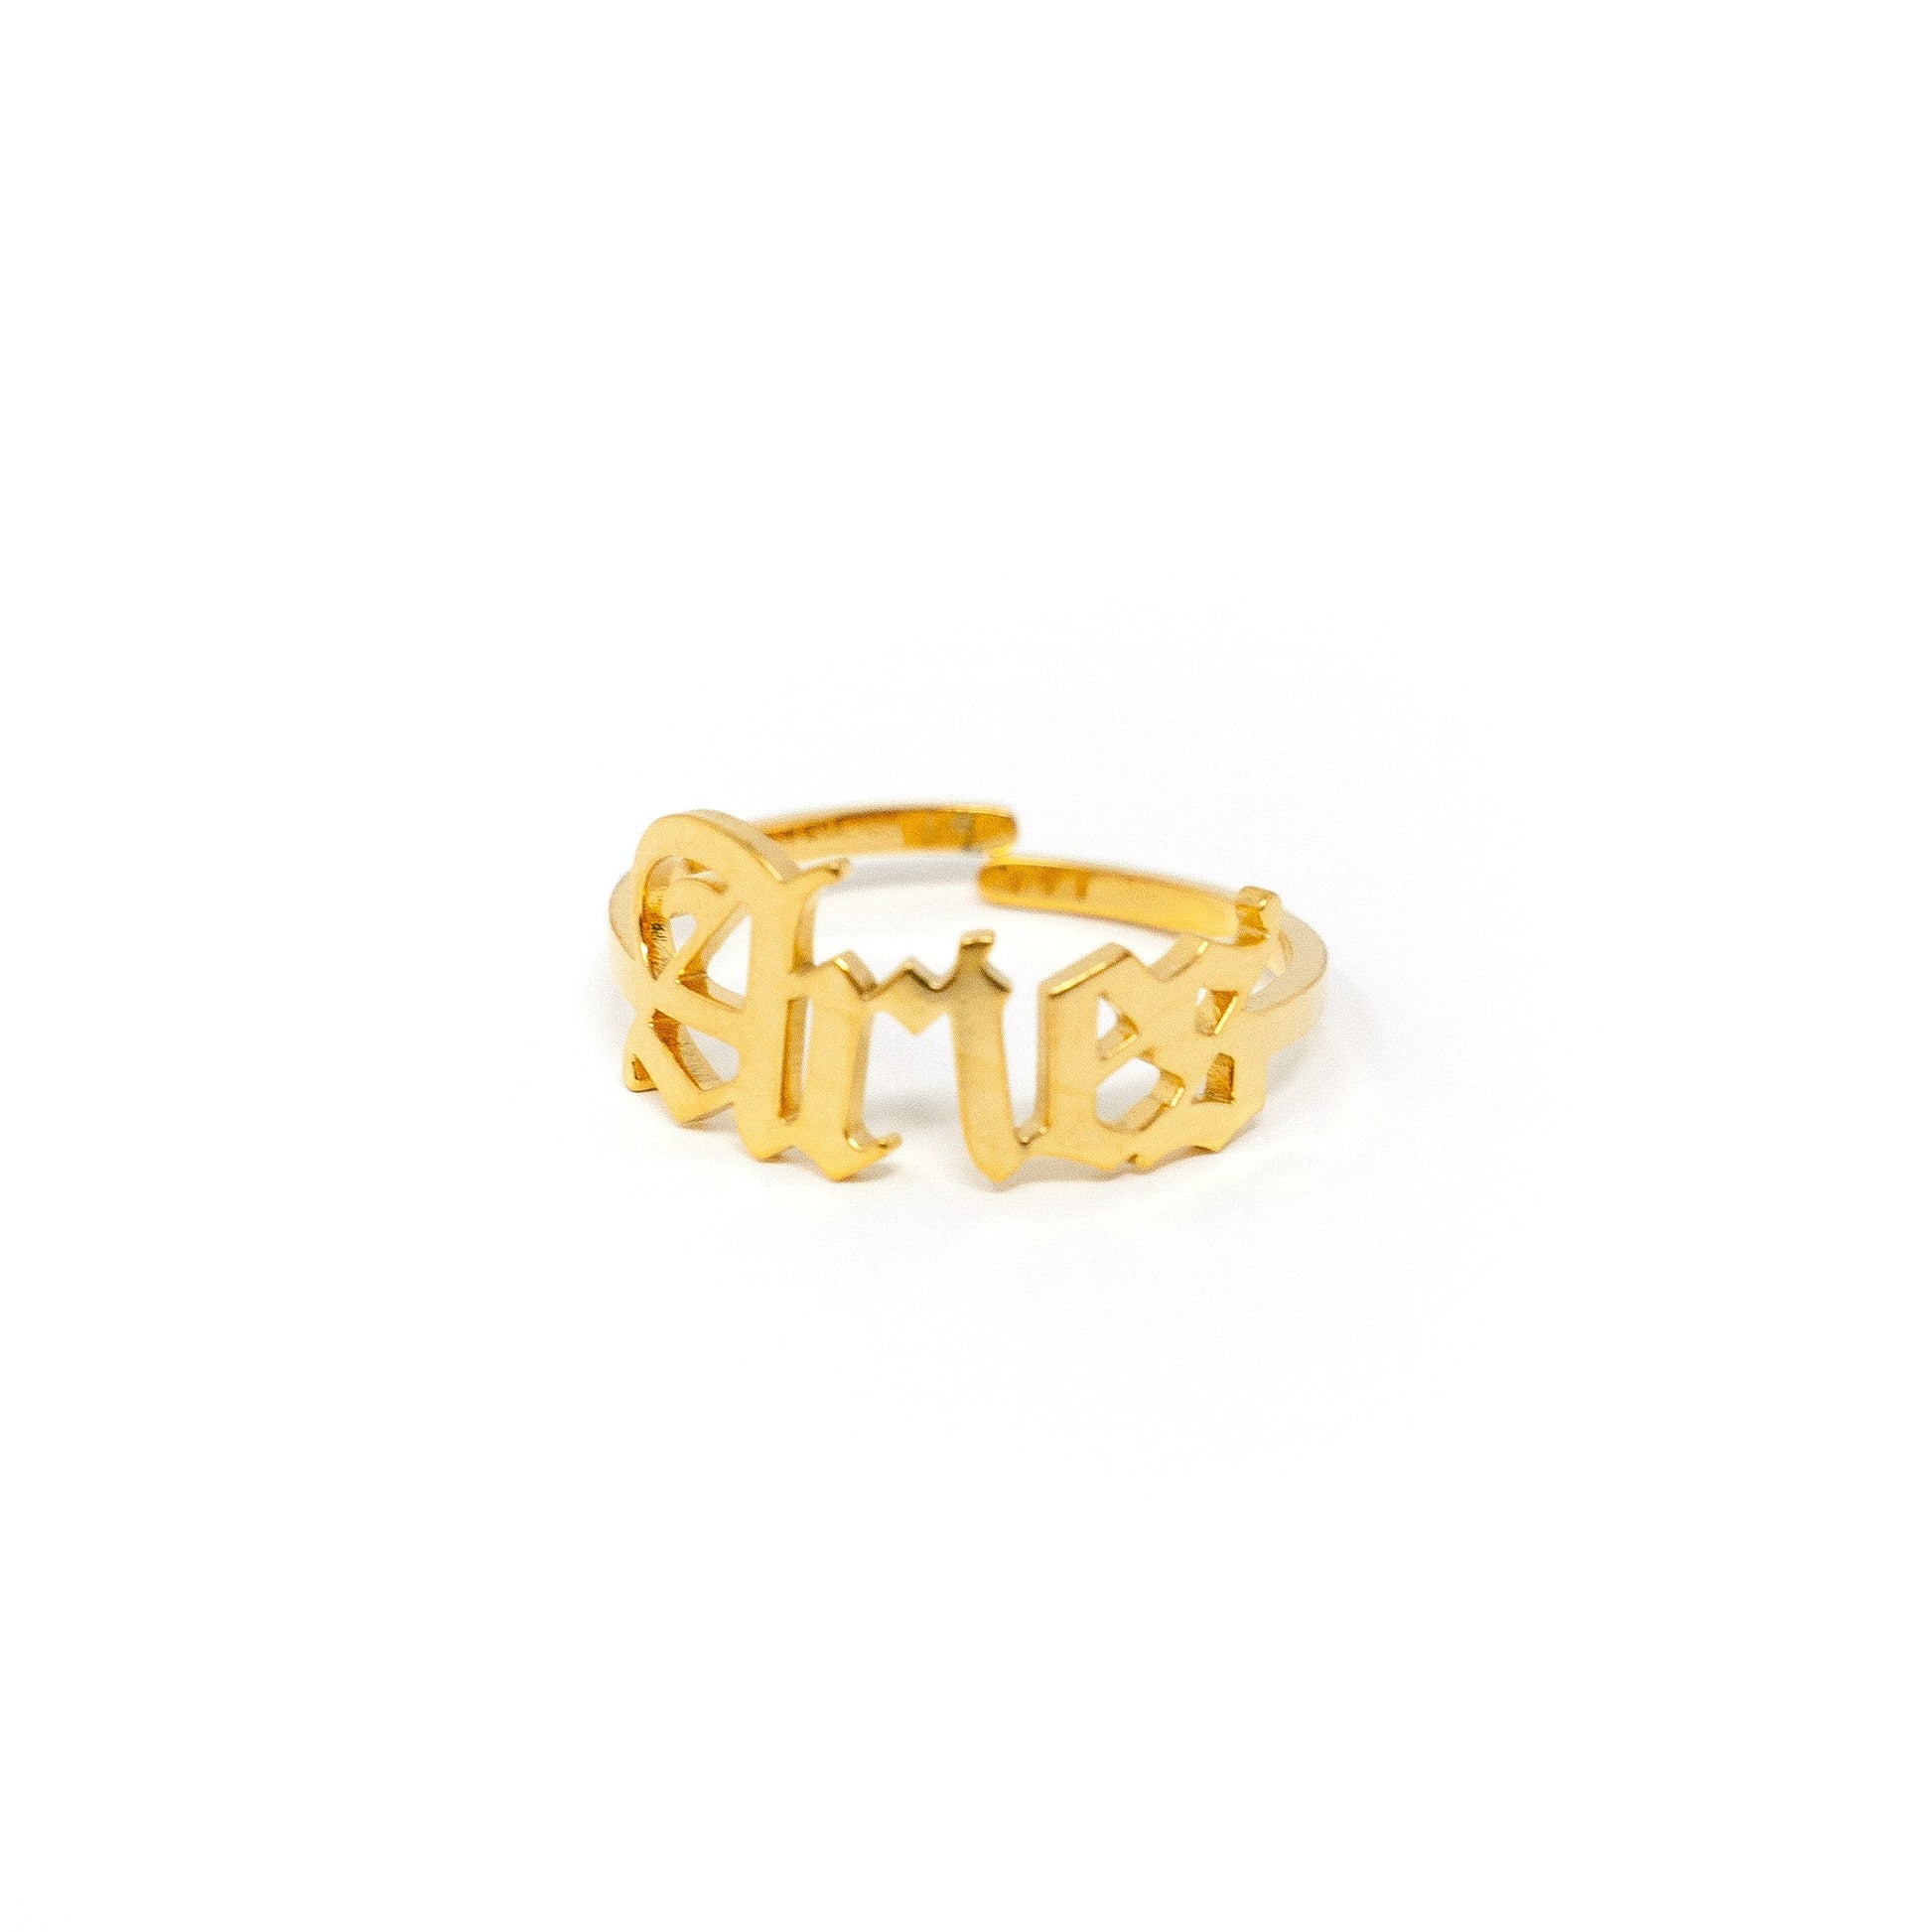 Zodiac Olde English Adjustable Rings JEWELRY The Sis Kiss Aries